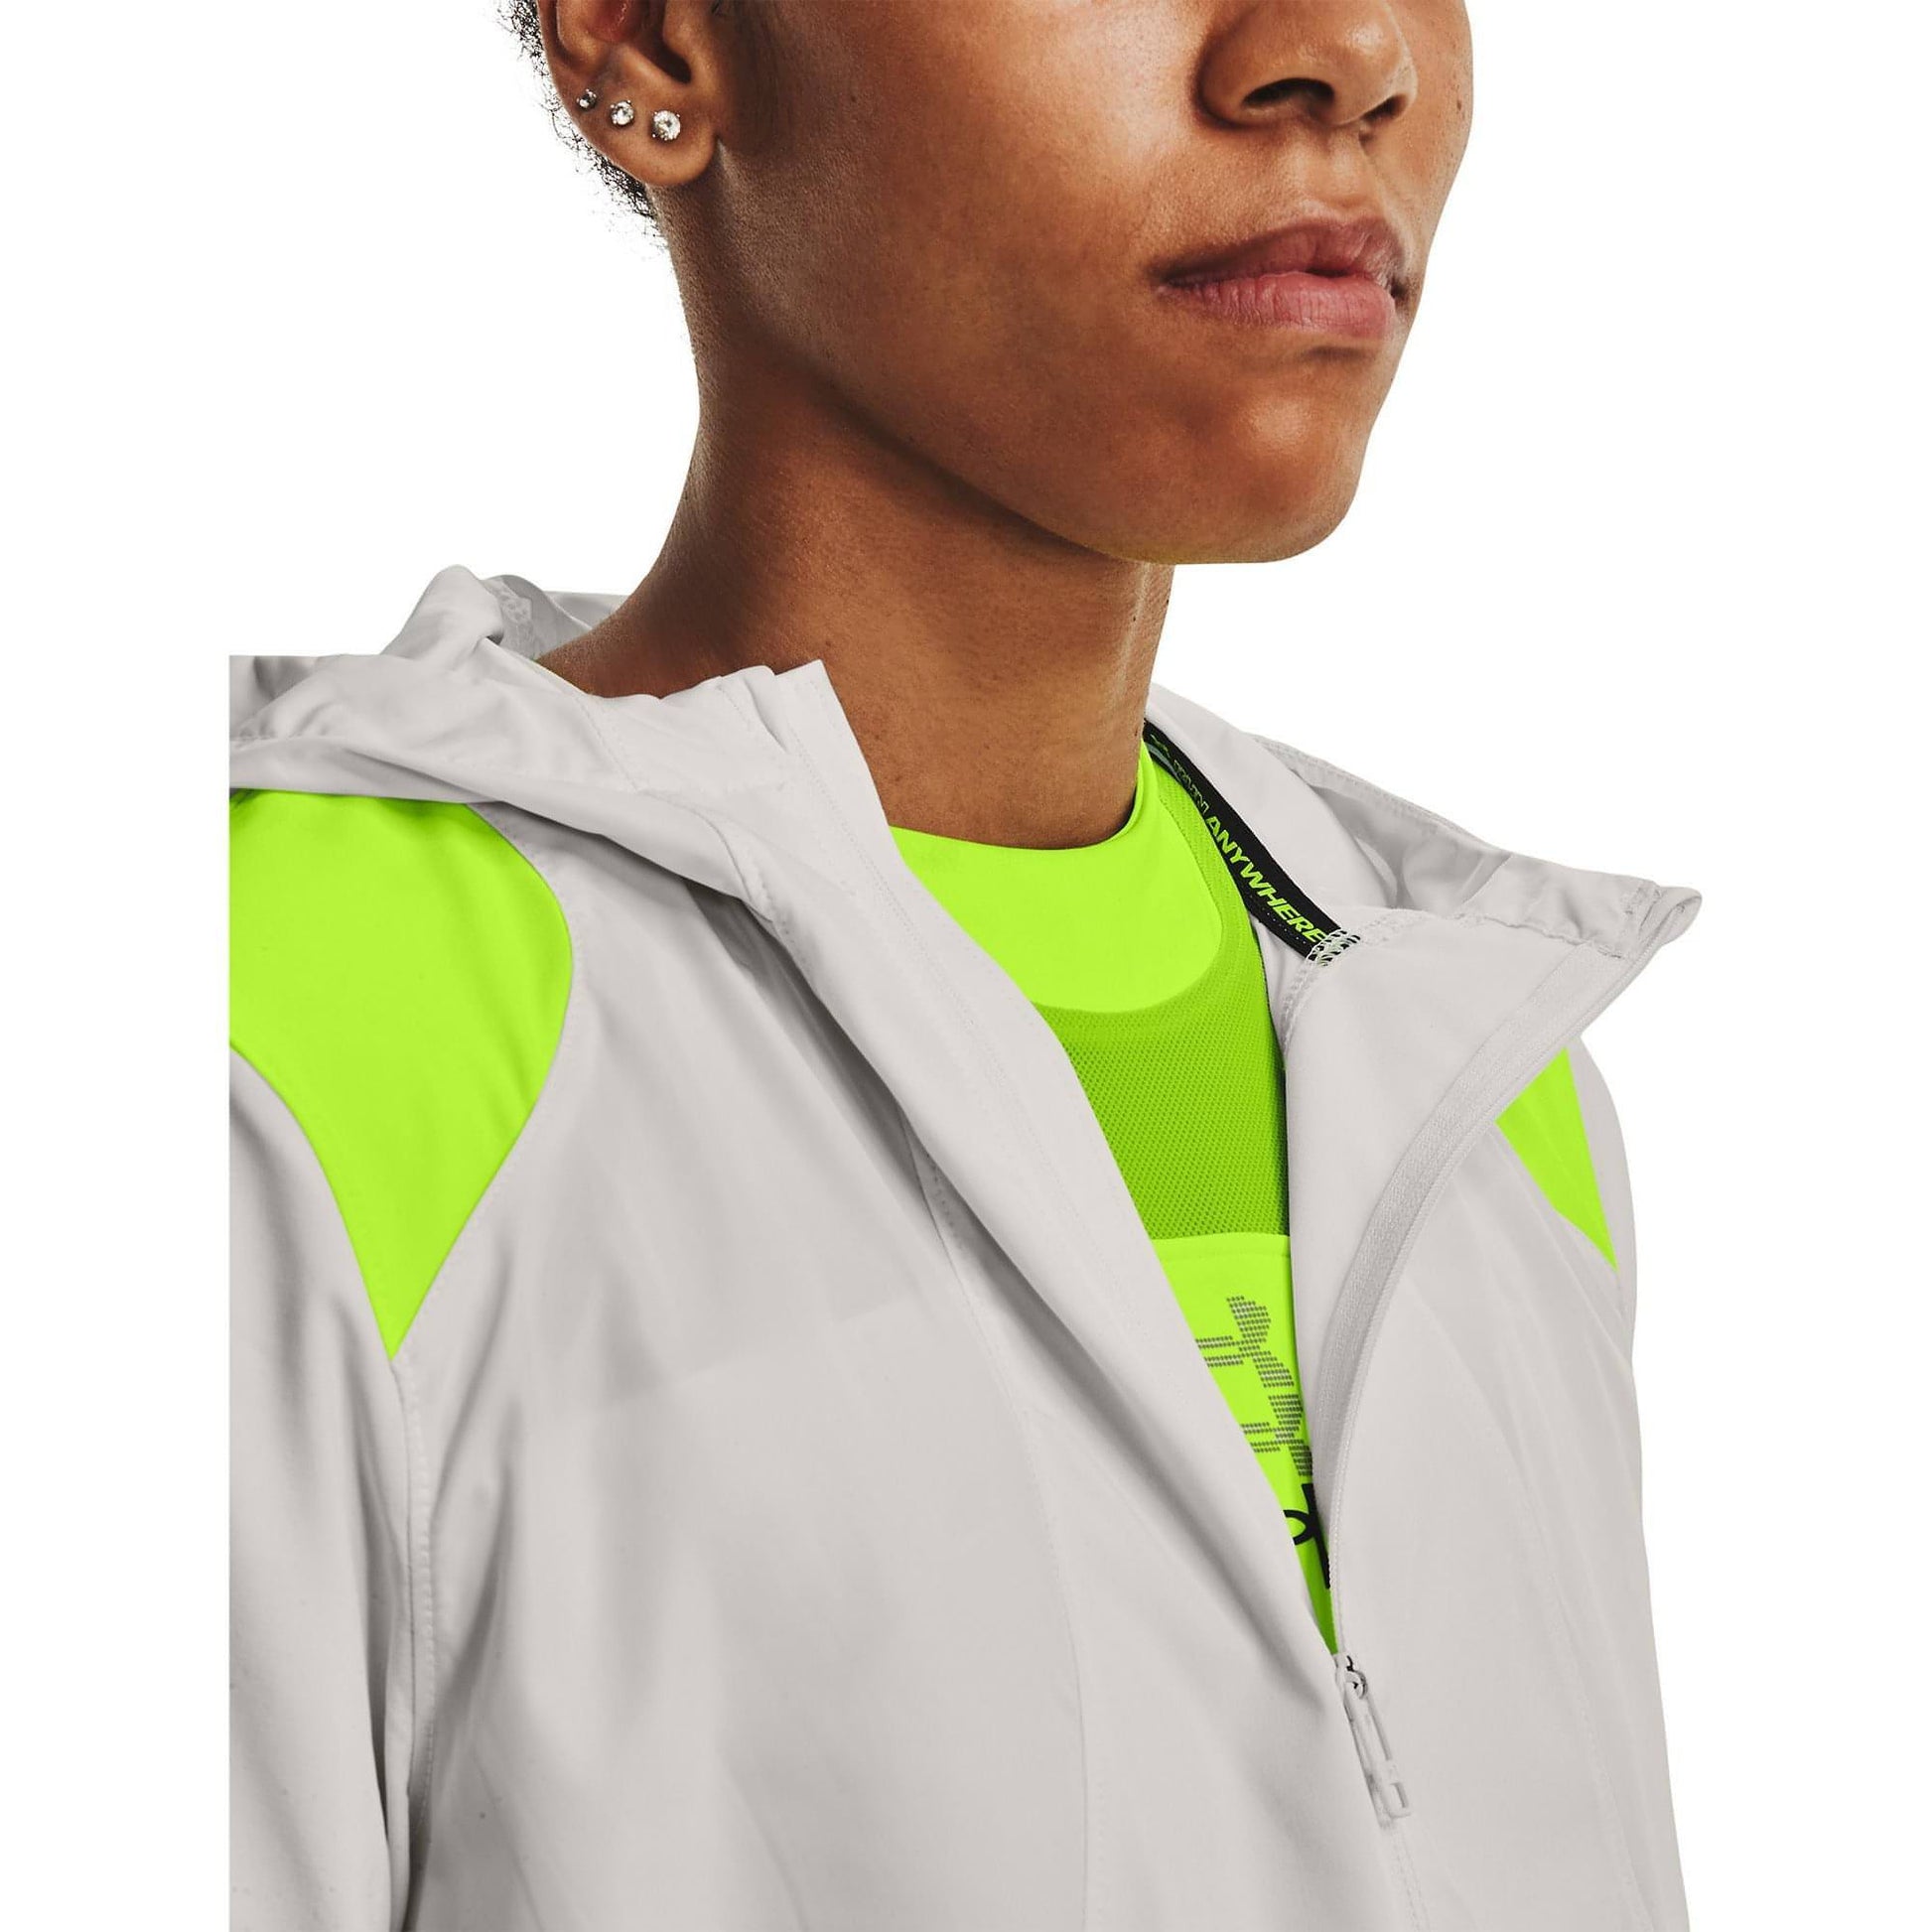 Under Armour Run Anywhere Anojacket Details